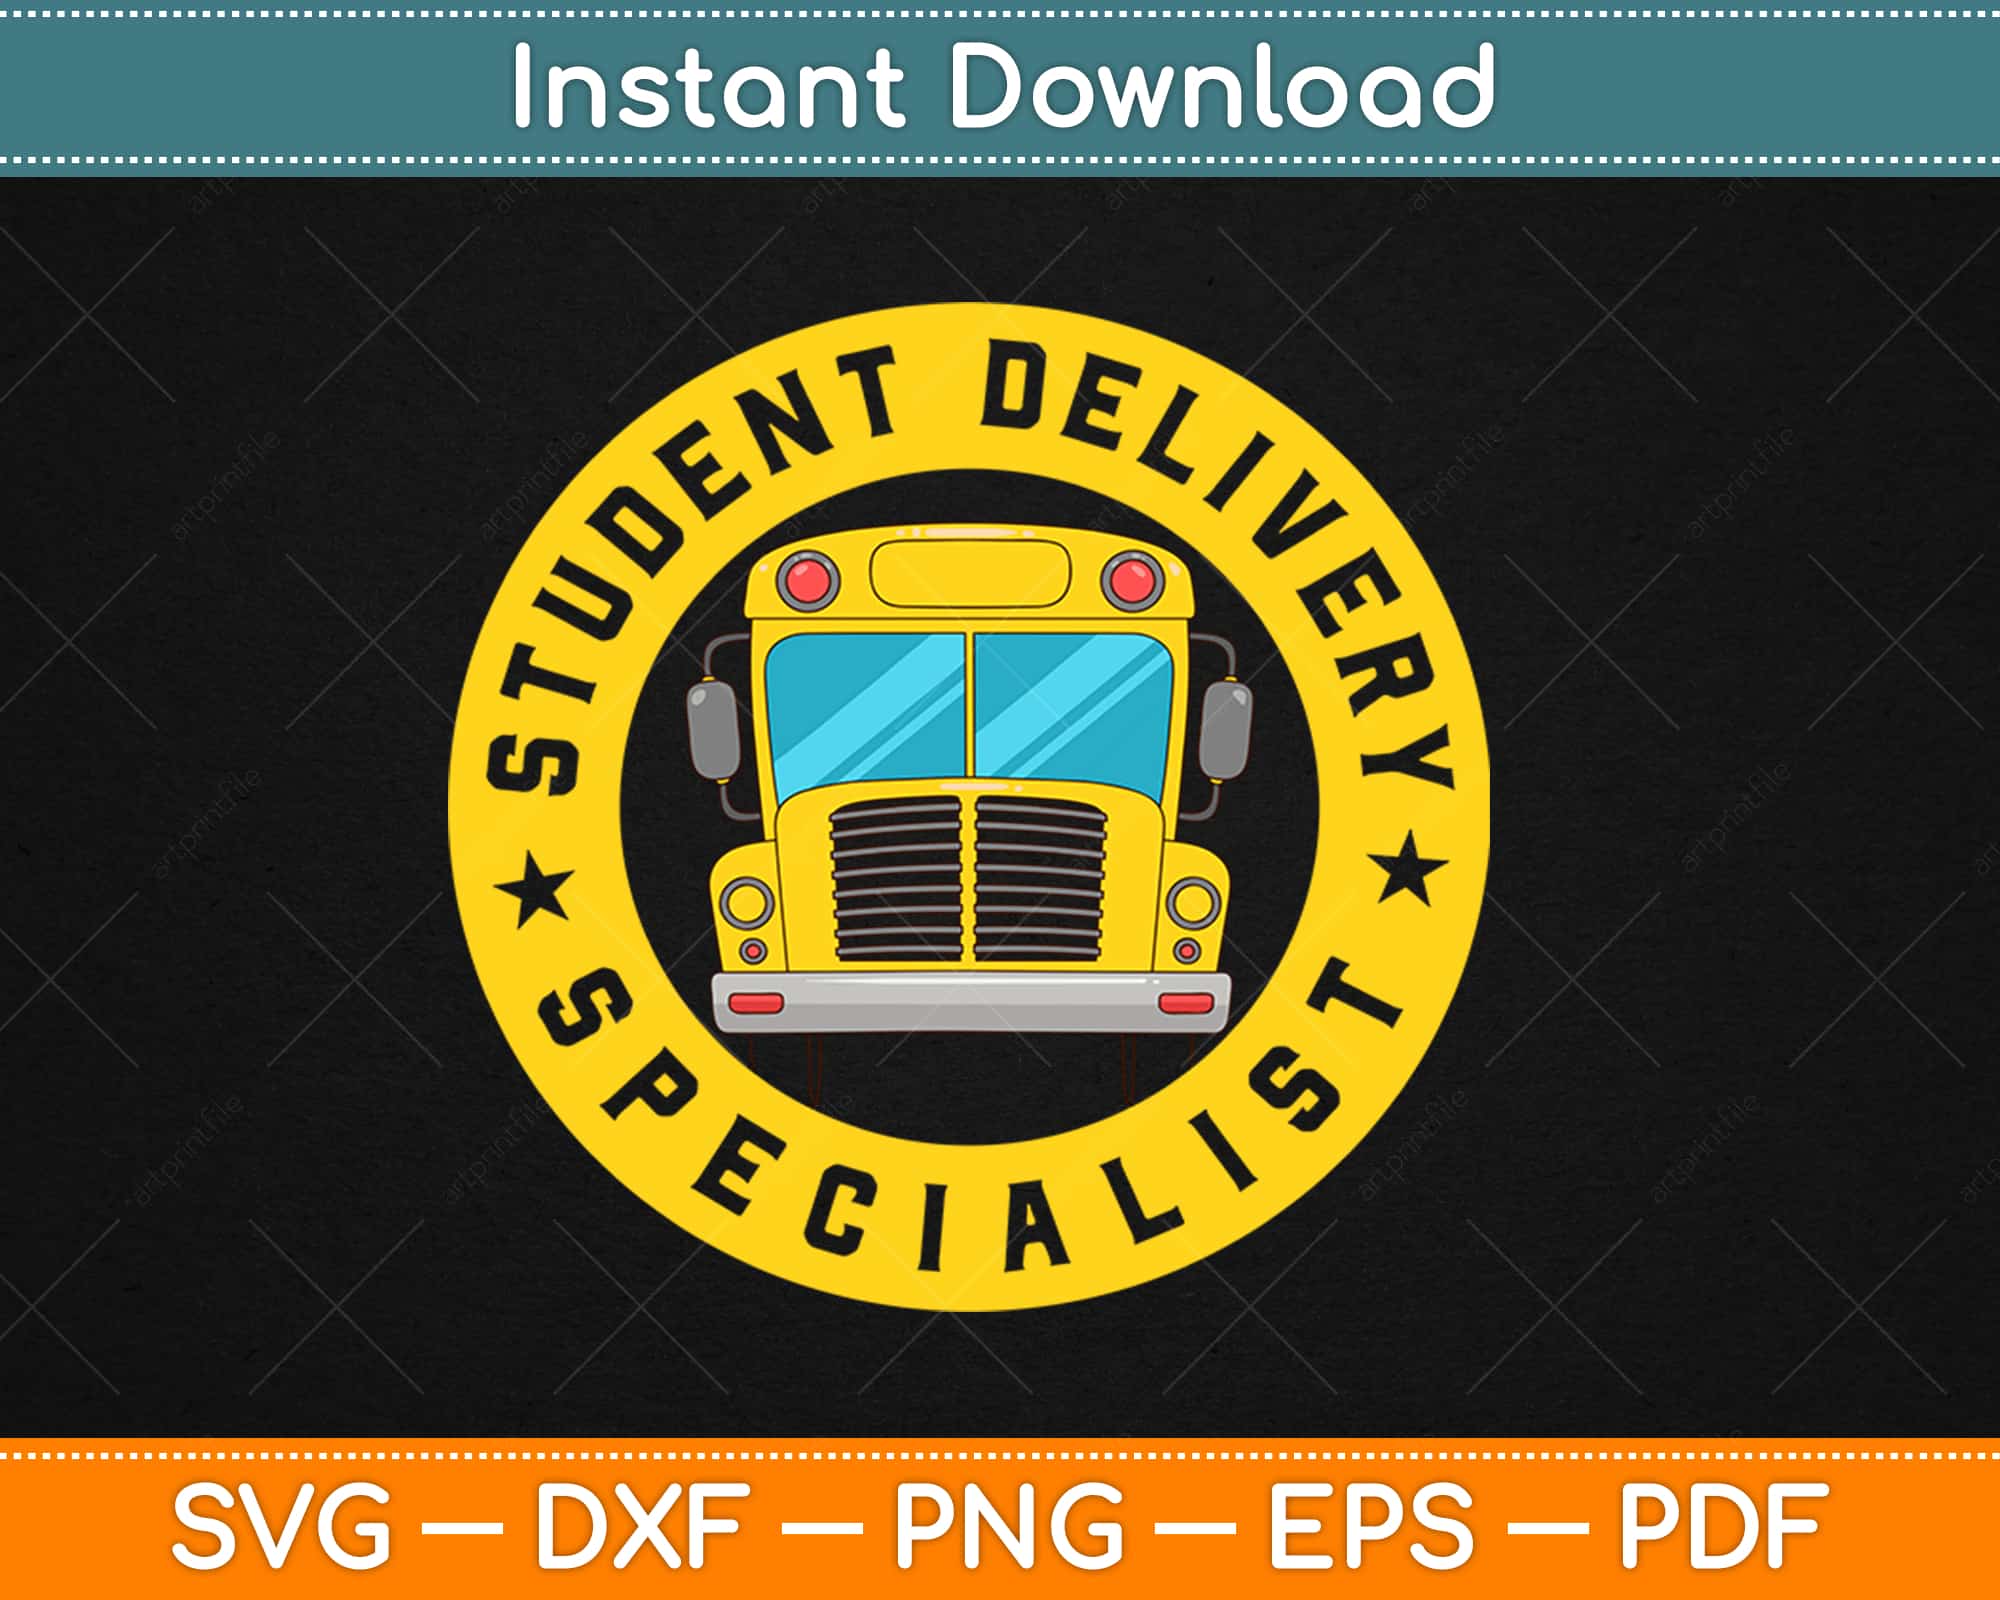 Download Student Delivery Specialist Funny School Bus Driver Svg Png Dxf Craft Cut File Artprintfile